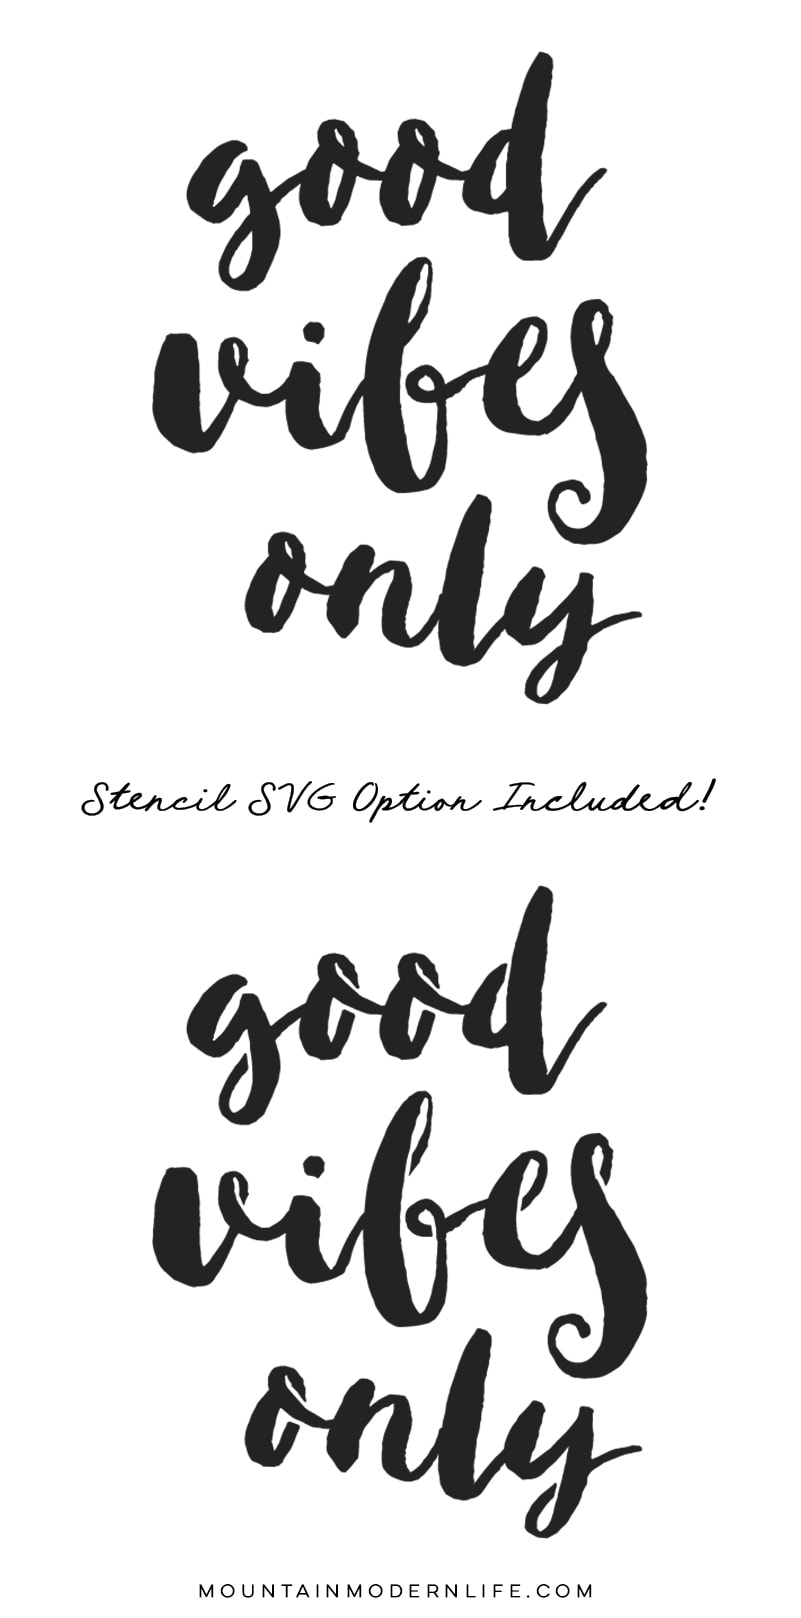 Instantly Download this Good Vibes Only SVG + Print! Use the SVG cut files to make your own sign for personal use! MountainModernLife.com